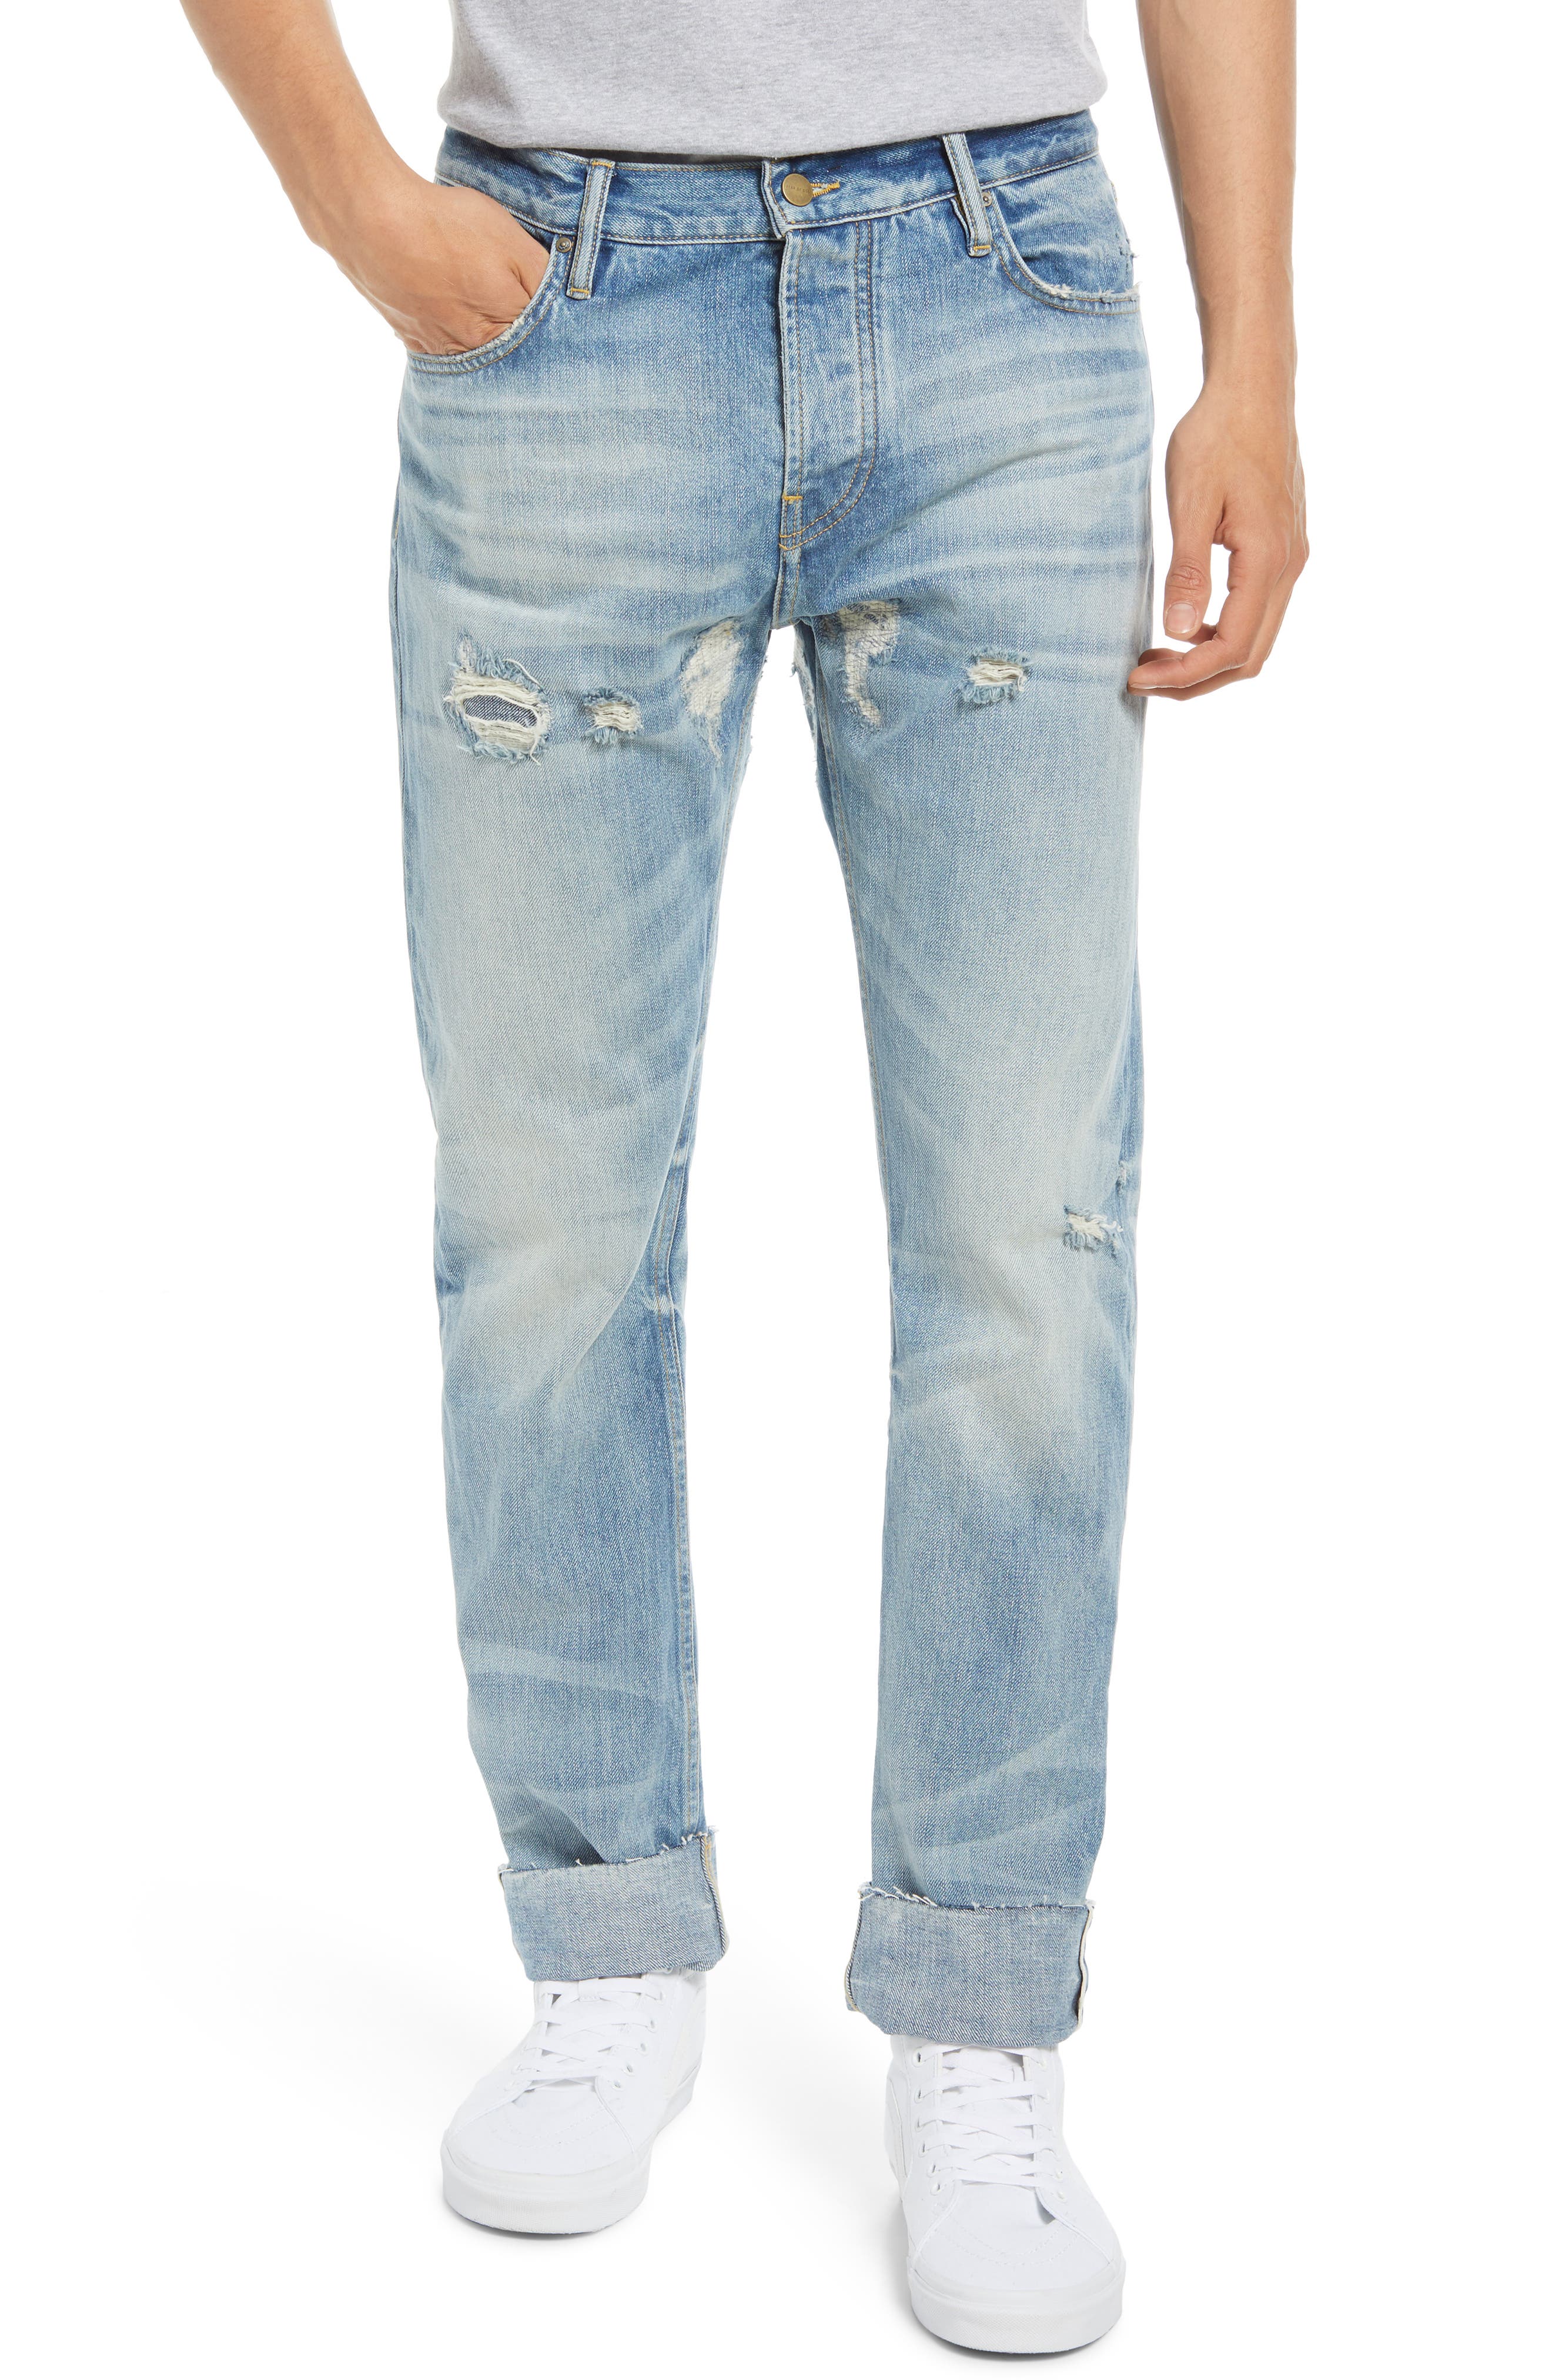 Fear of God 7th Collection Distressed Jeans in 5 Year Indigo Wash at Nordstrom, Size 30